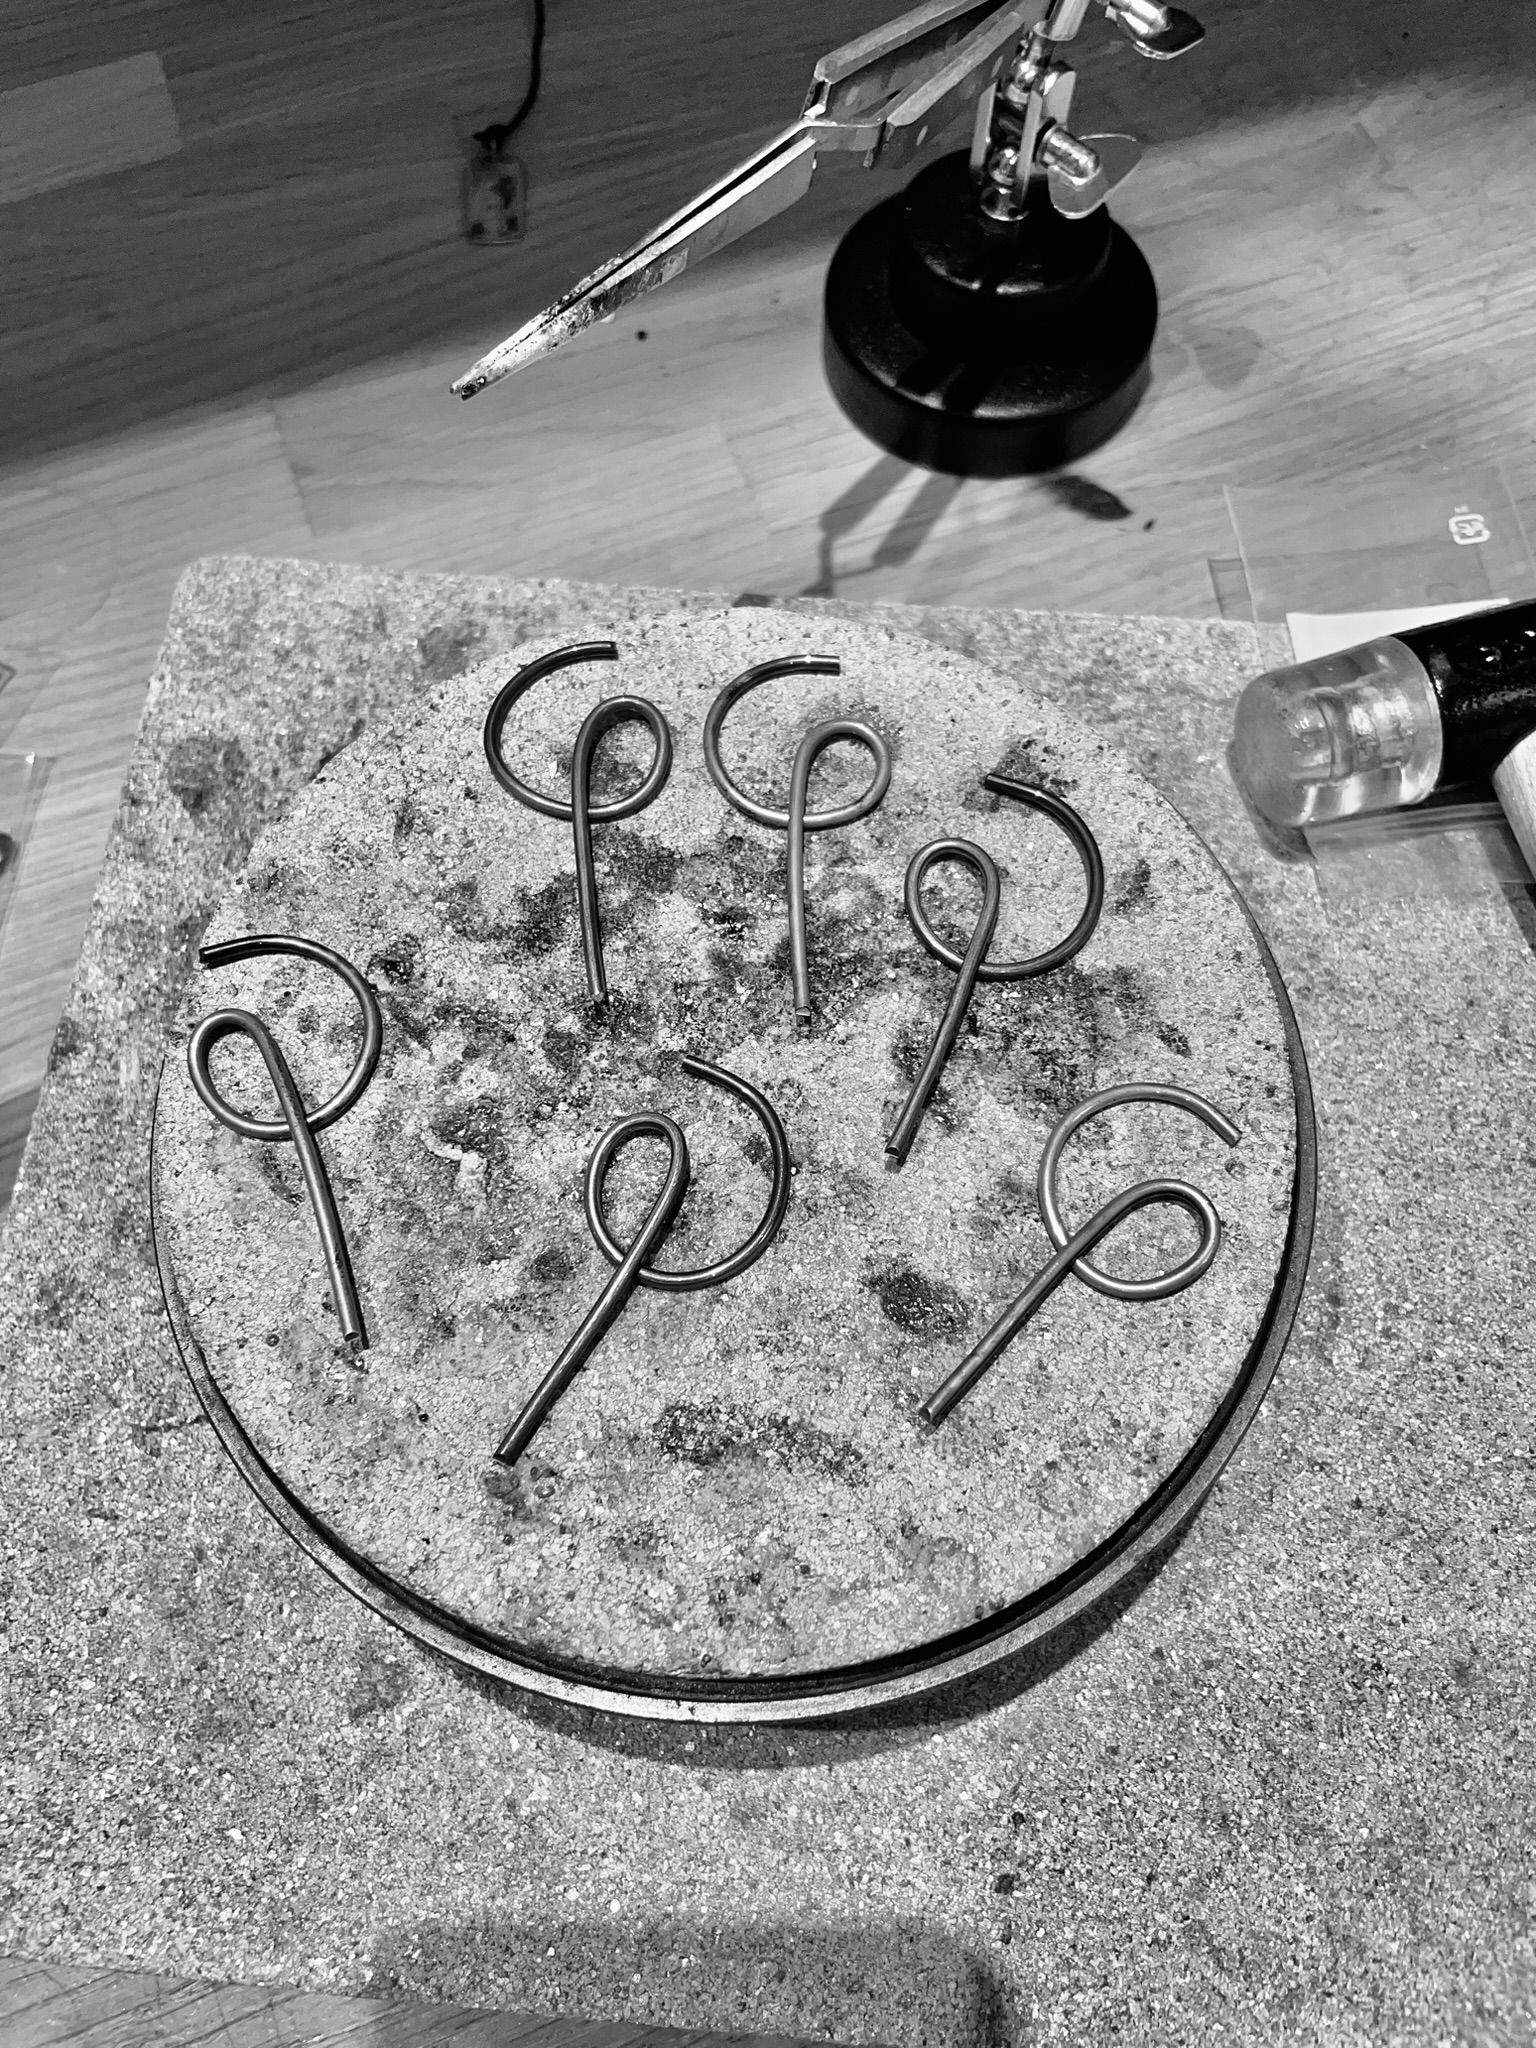 Earrings shaped as venus symbols in the making on a silversmith's bench